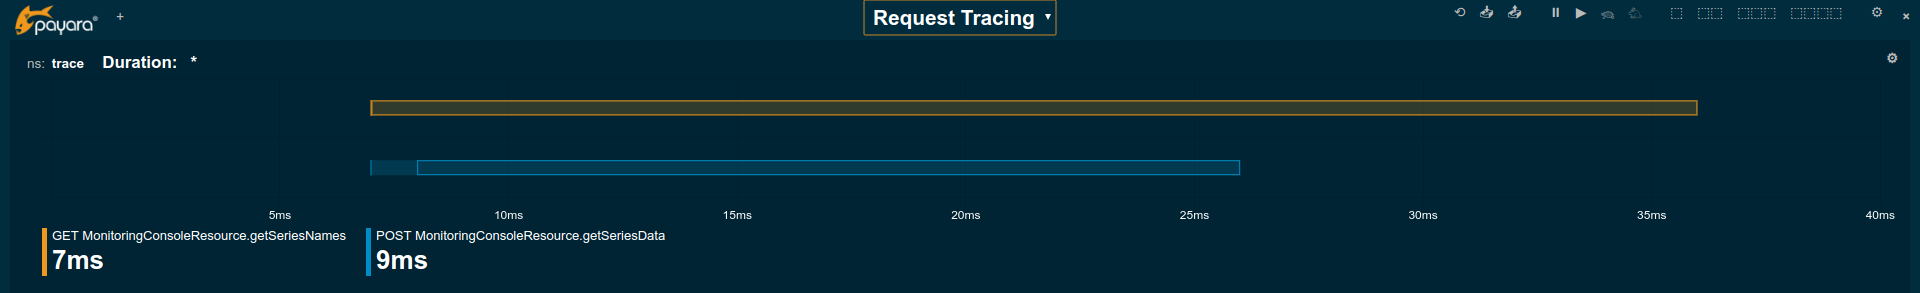 Request Tracing Page